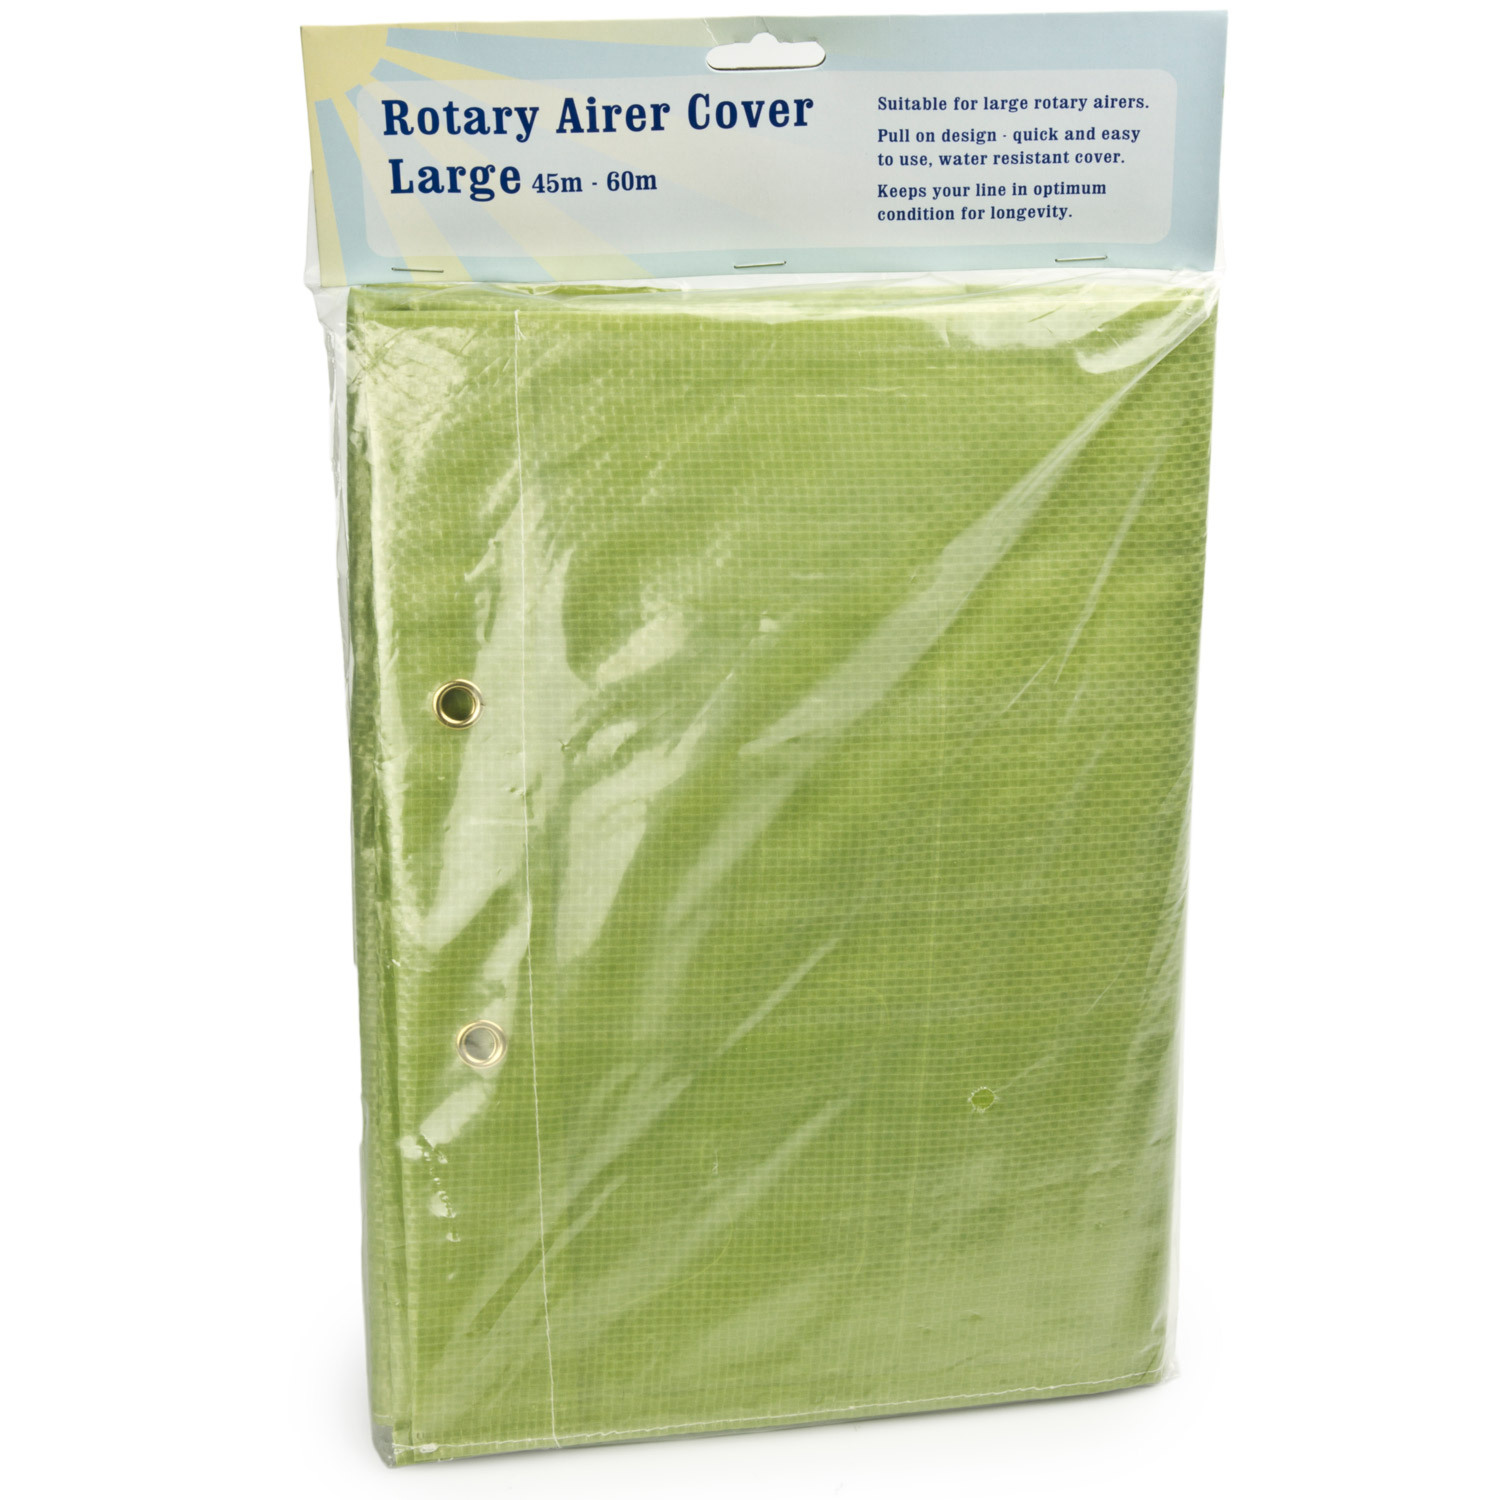 Rotary Airier Cover Image